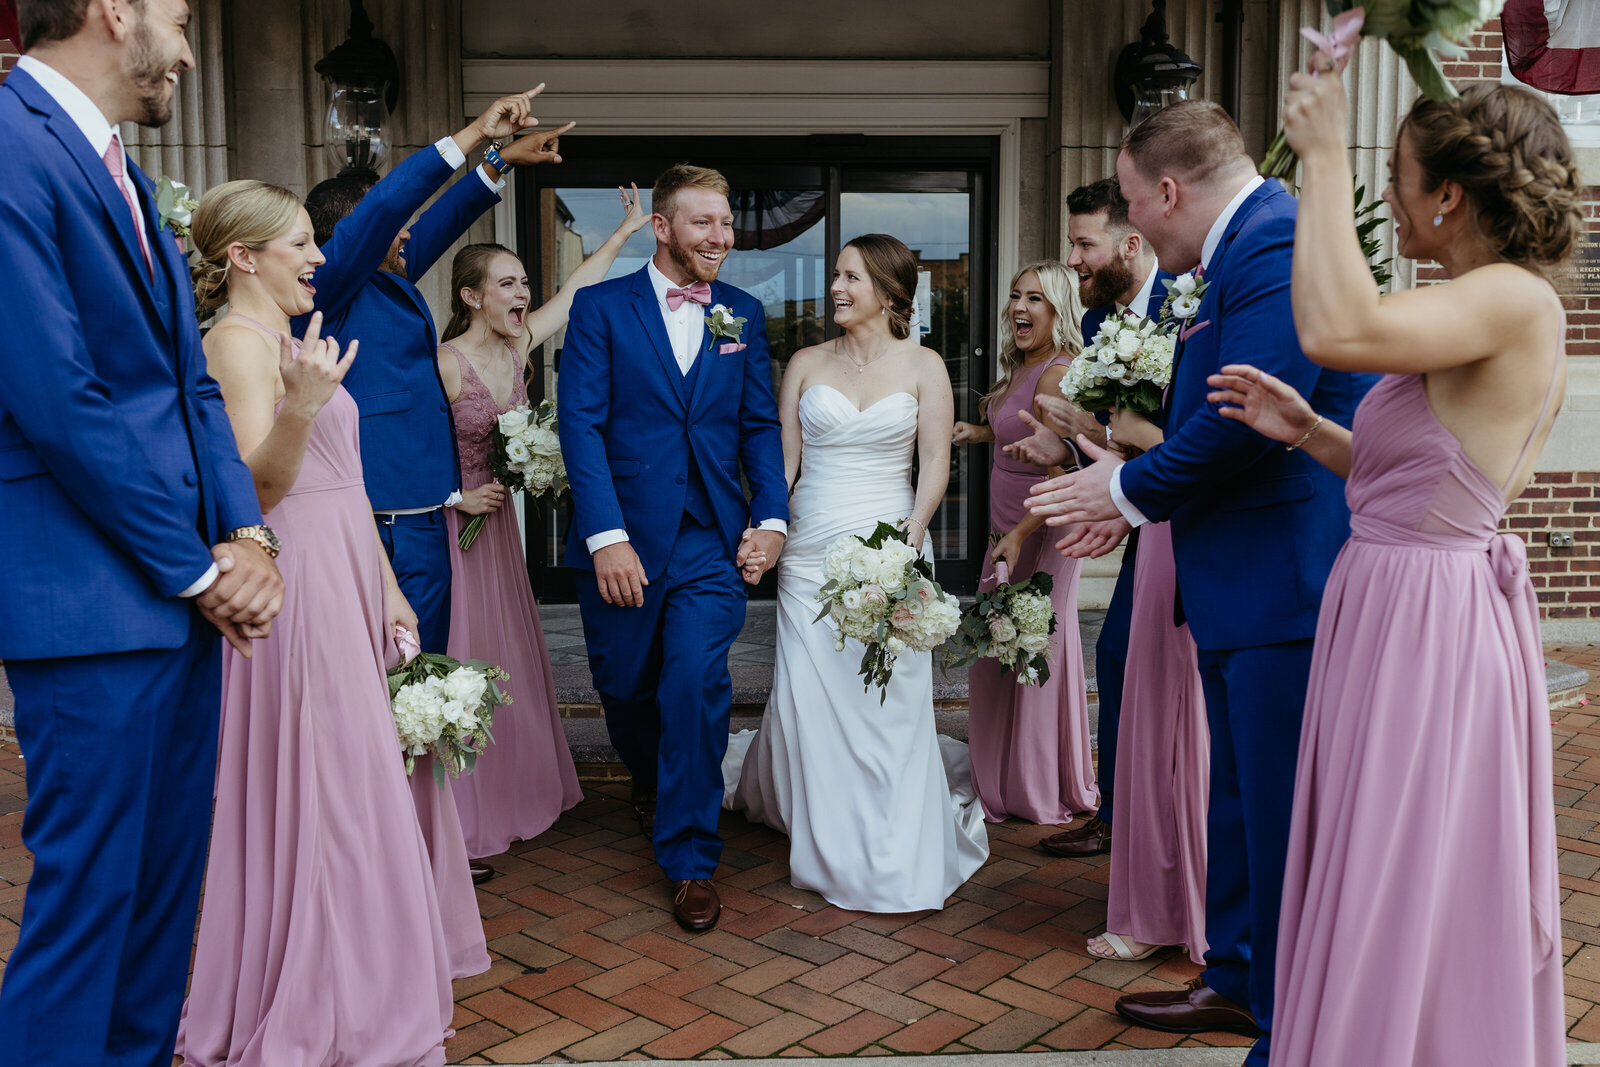 A bride and groom walk between their wedding party while laughing